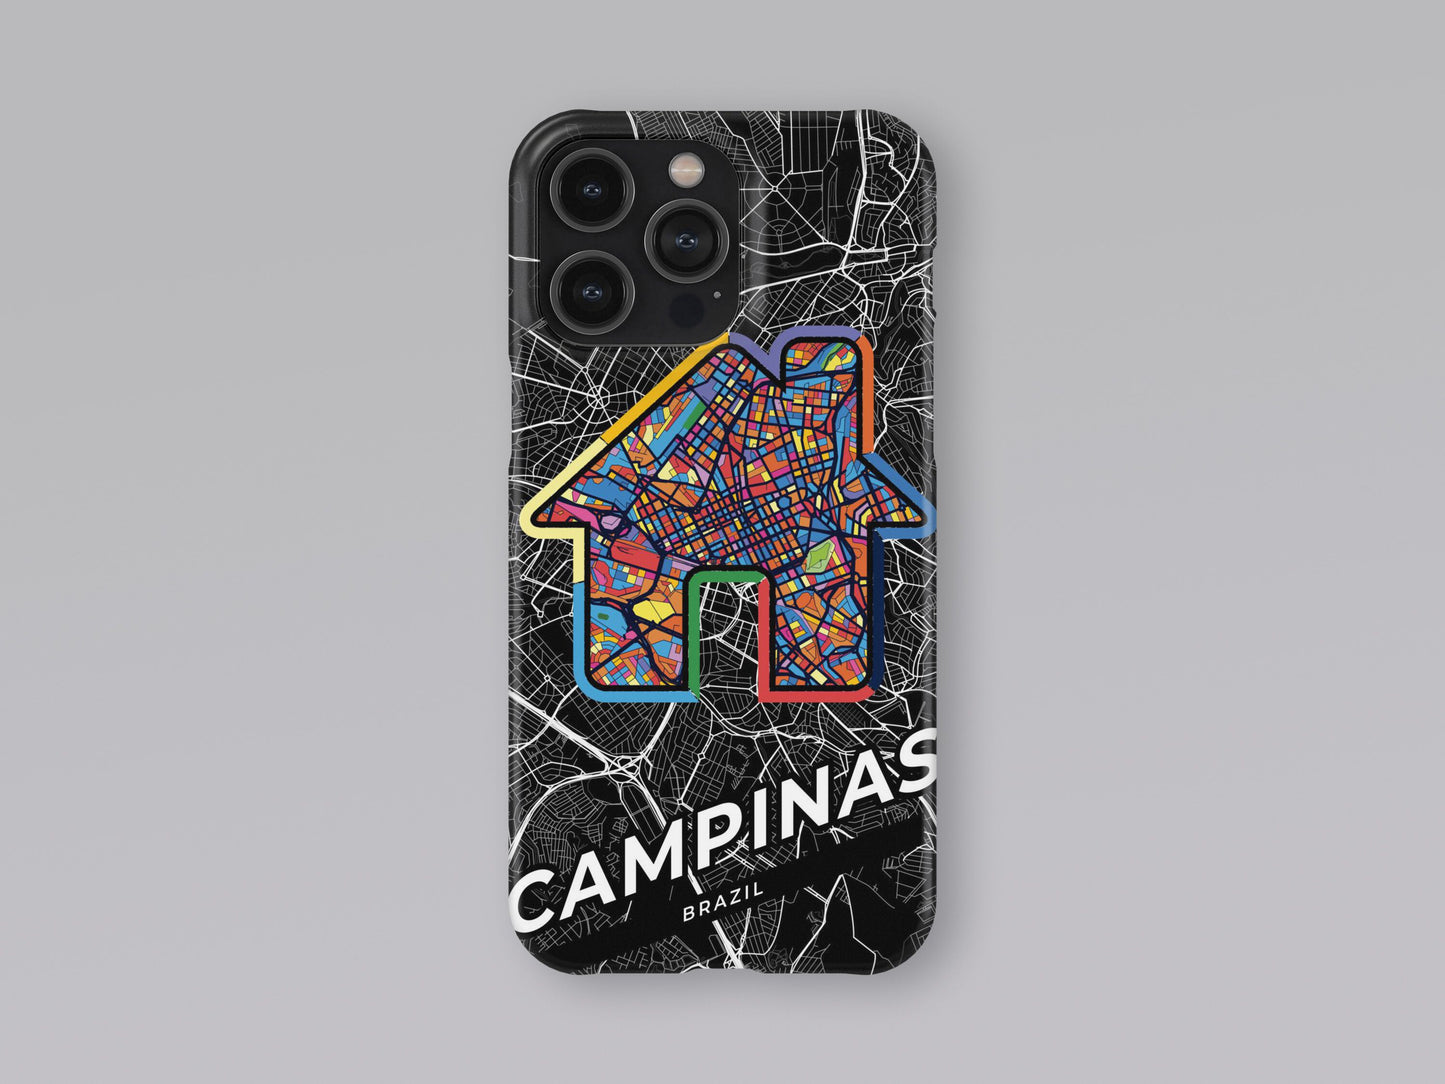 Campinas Brazil slim phone case with colorful icon. Birthday, wedding or housewarming gift. Couple match cases. 3